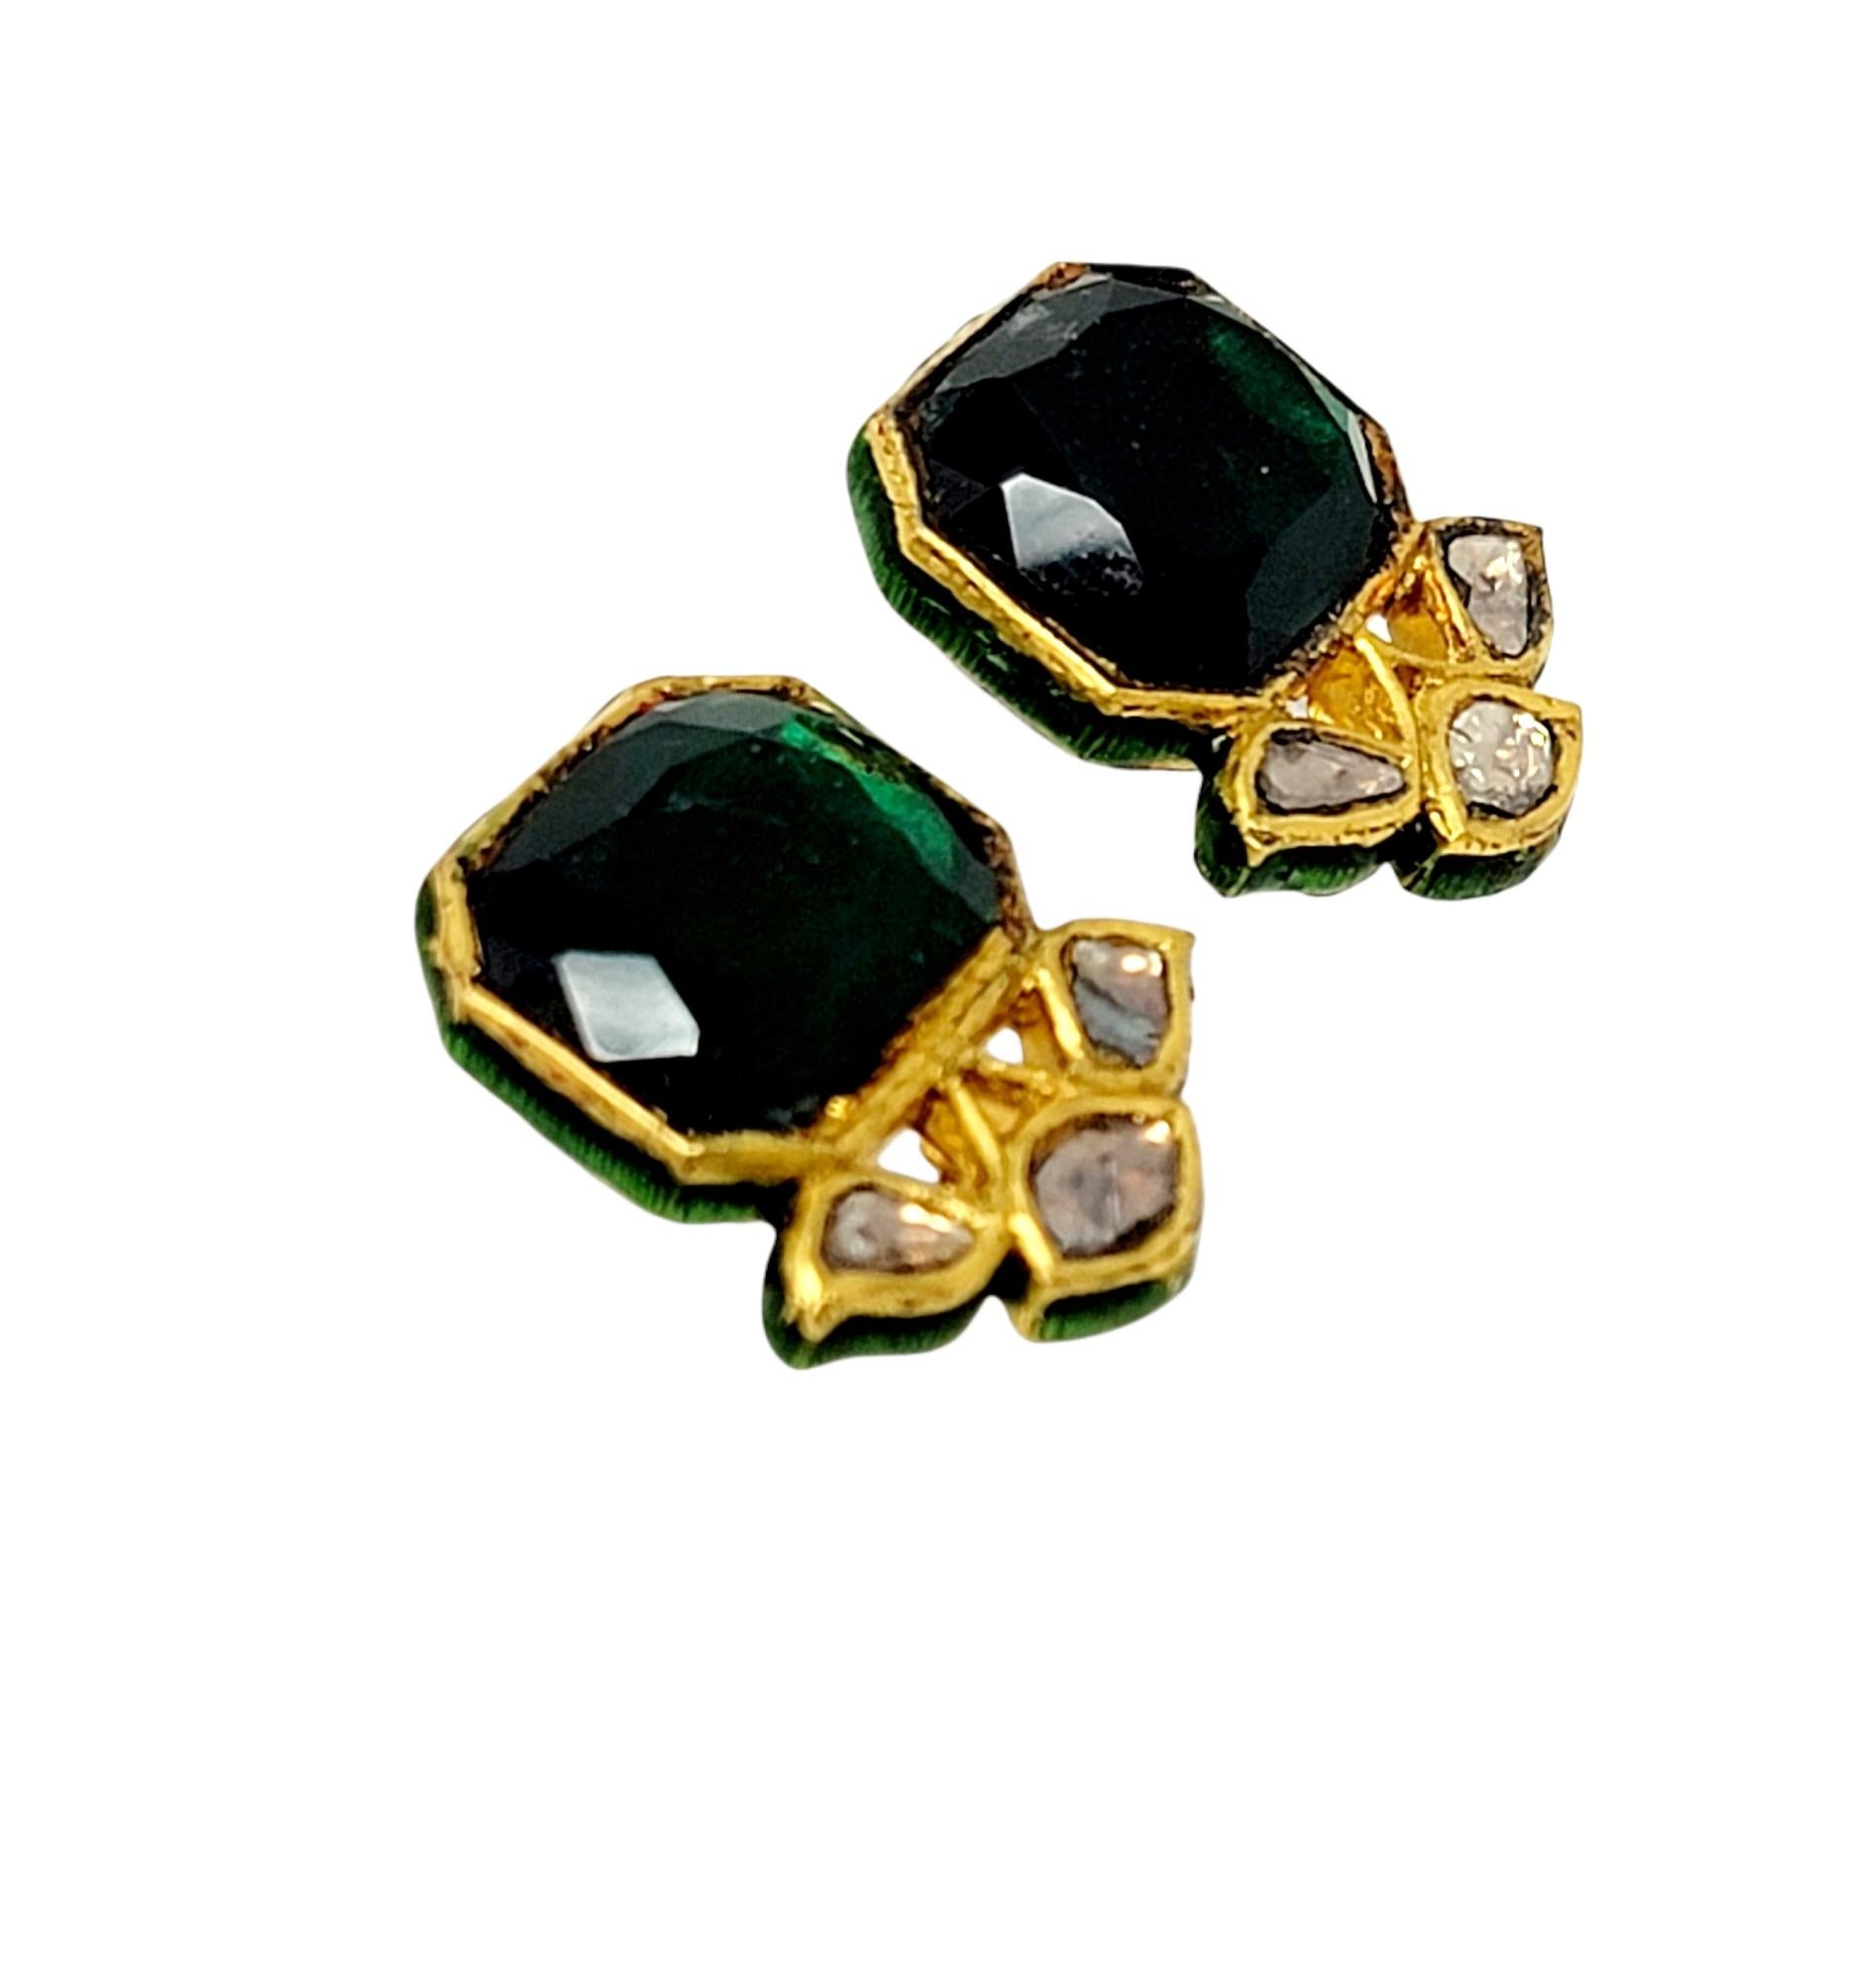 Vintage Uncut Diamond and Green Glass Earrings in 18 Karat Gold with Enamel In Good Condition For Sale In Scottsdale, AZ